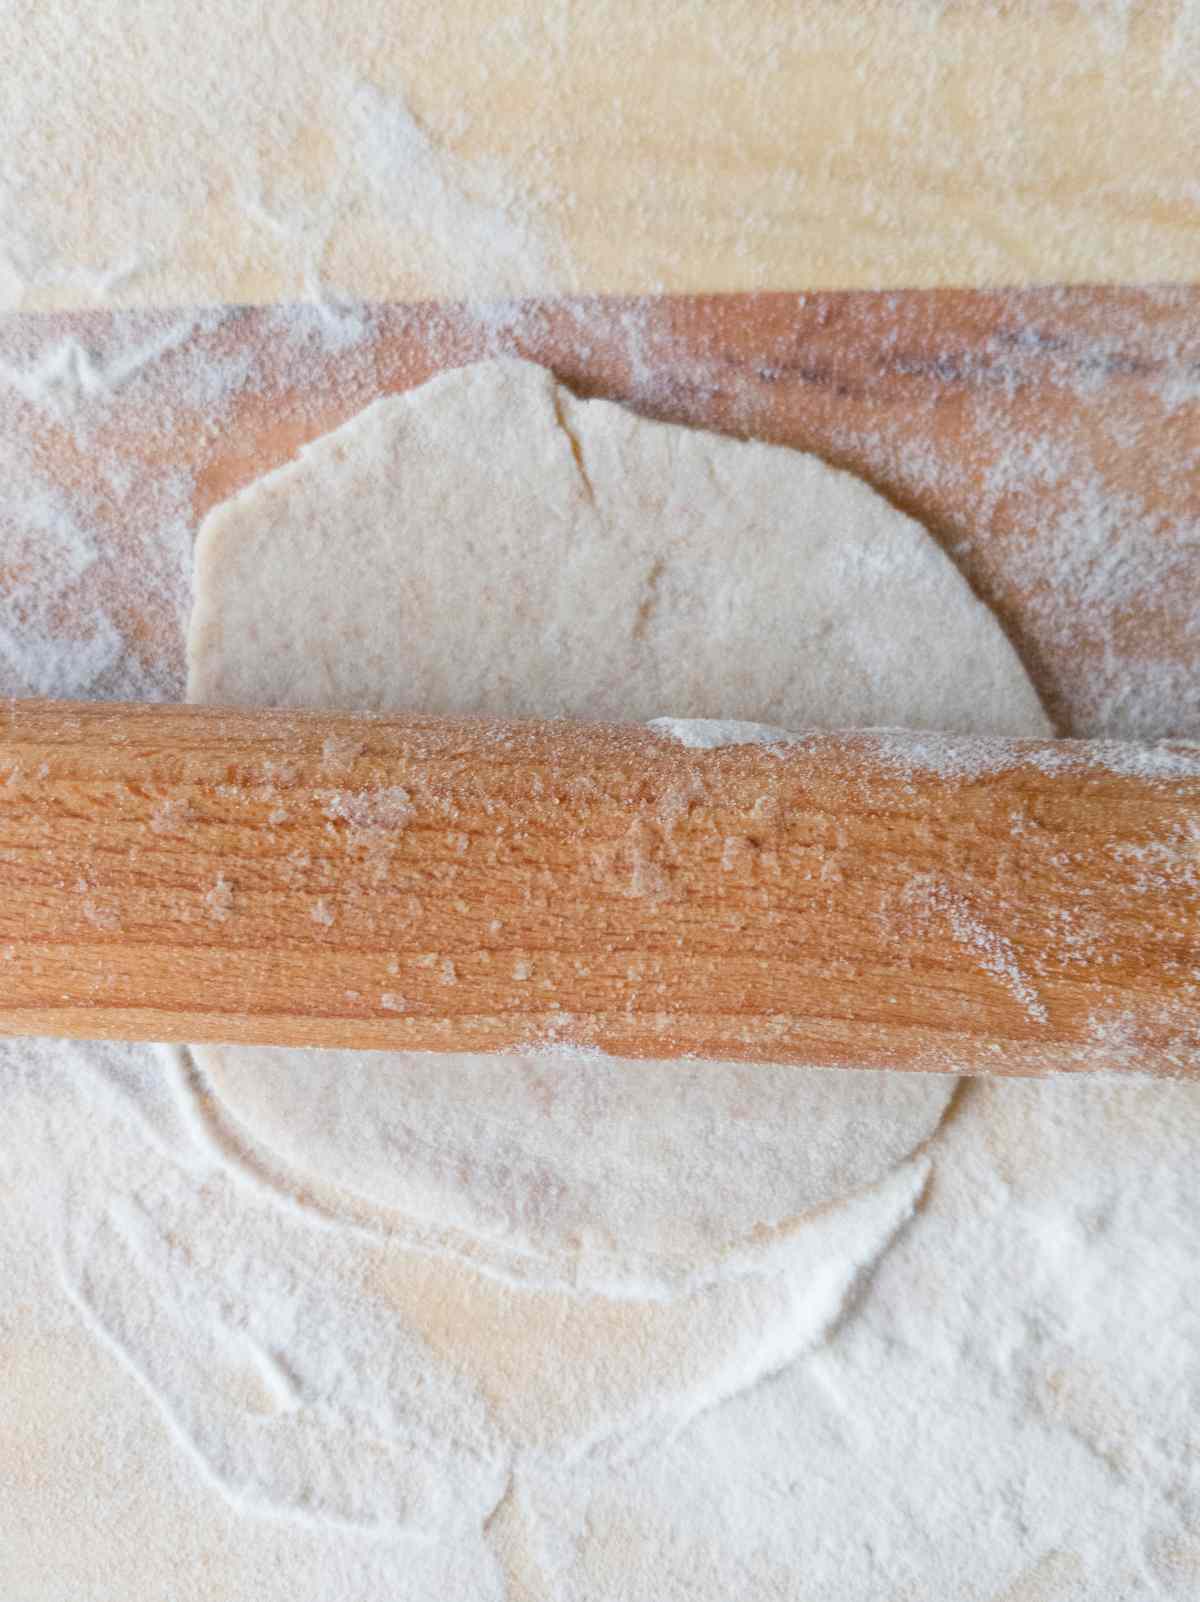 A little piece of dough rolled out with a wooden rolling pin that is laying on top of it.